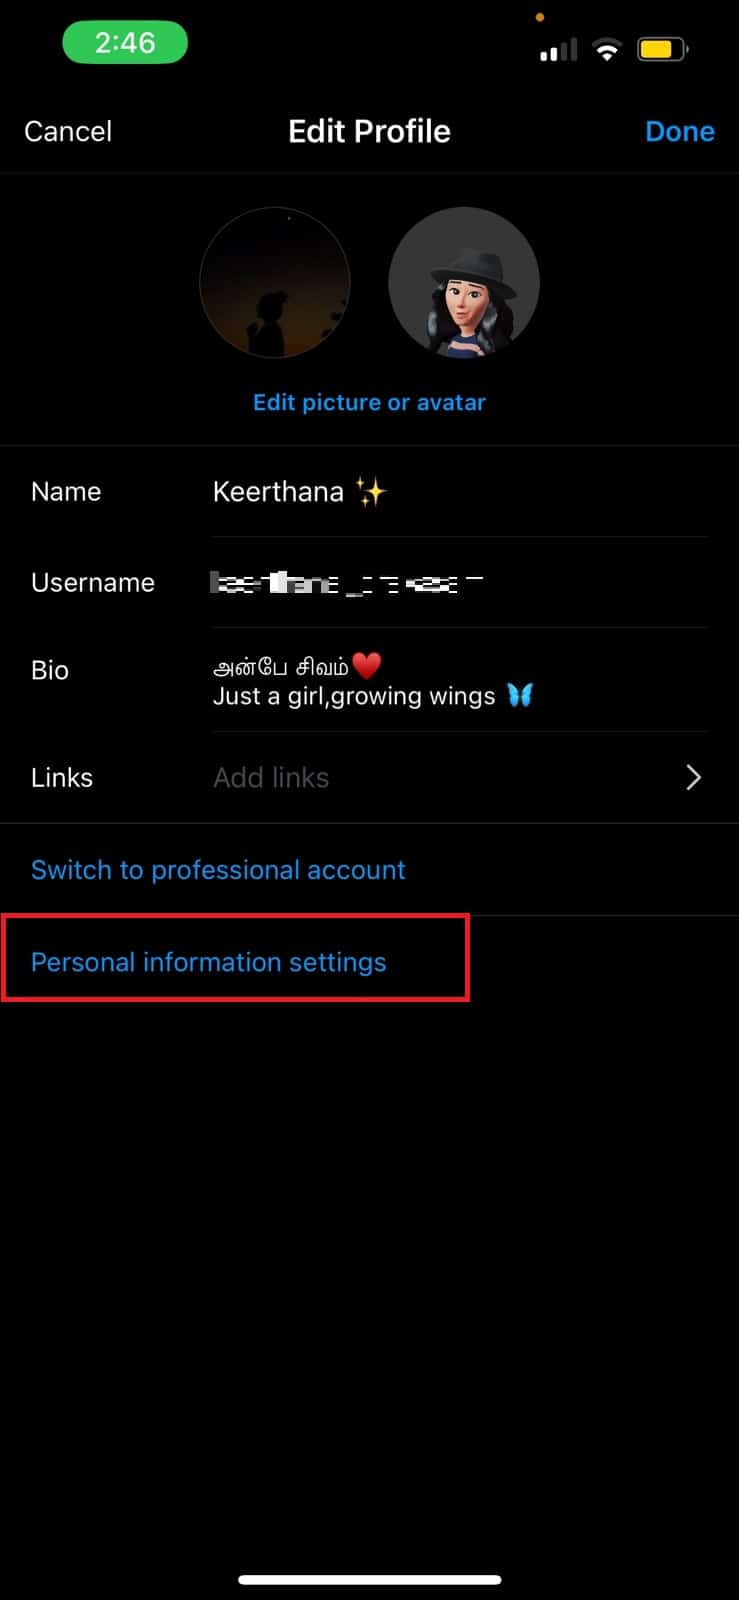 In Edit profile, tap on Personal information settings.